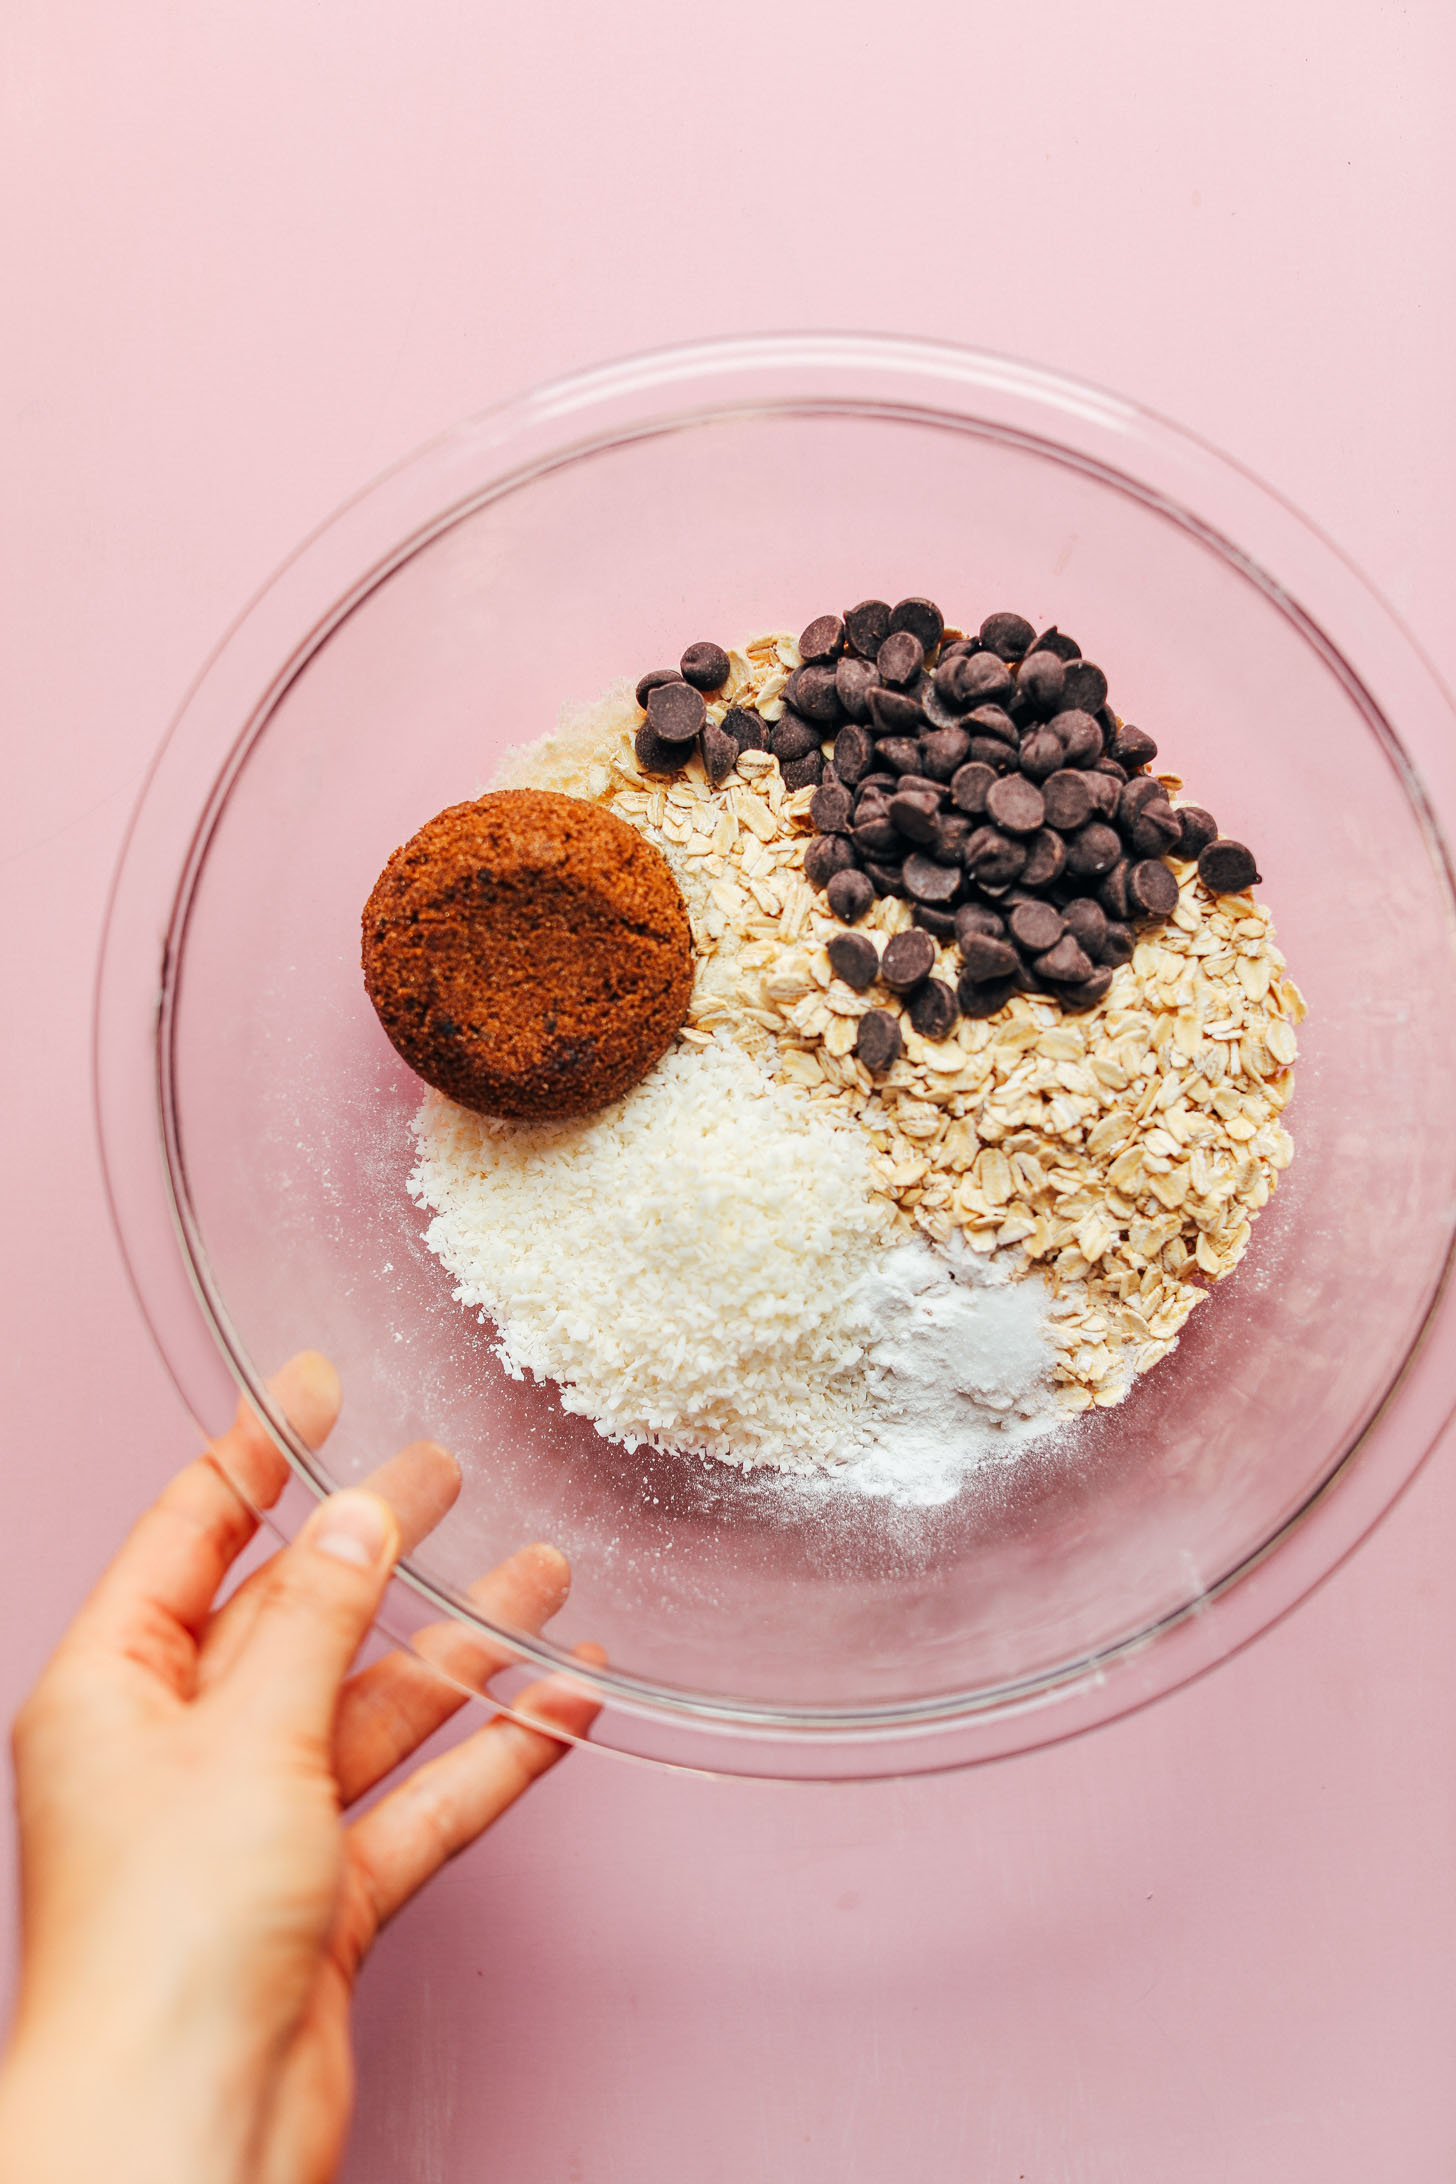 Glass mixing bowl with oats, almond flour, coconut sugar, dark chocolate chips, and other dry ingredients for Gluten-Free Oatmeal Chocolate Chip Cookies